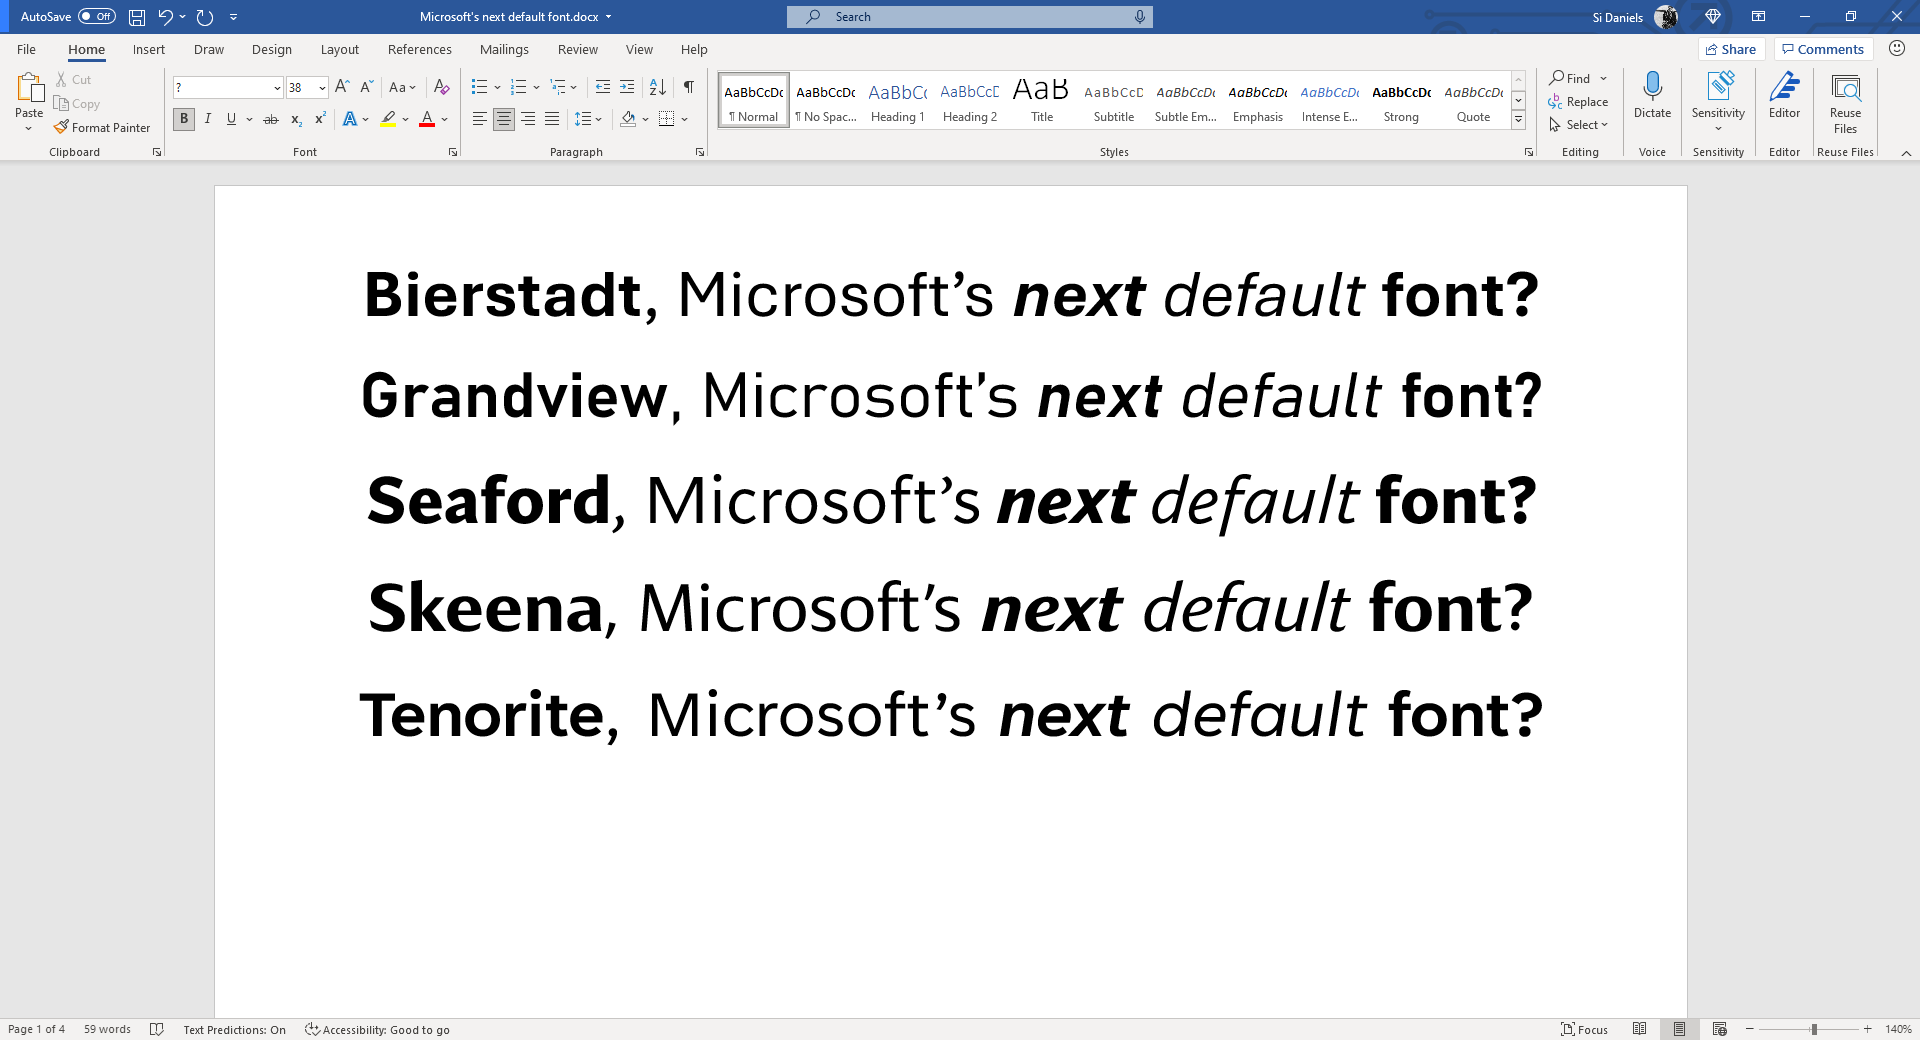 Microsoft is retiring its default font, and it wants your help choosing a new one